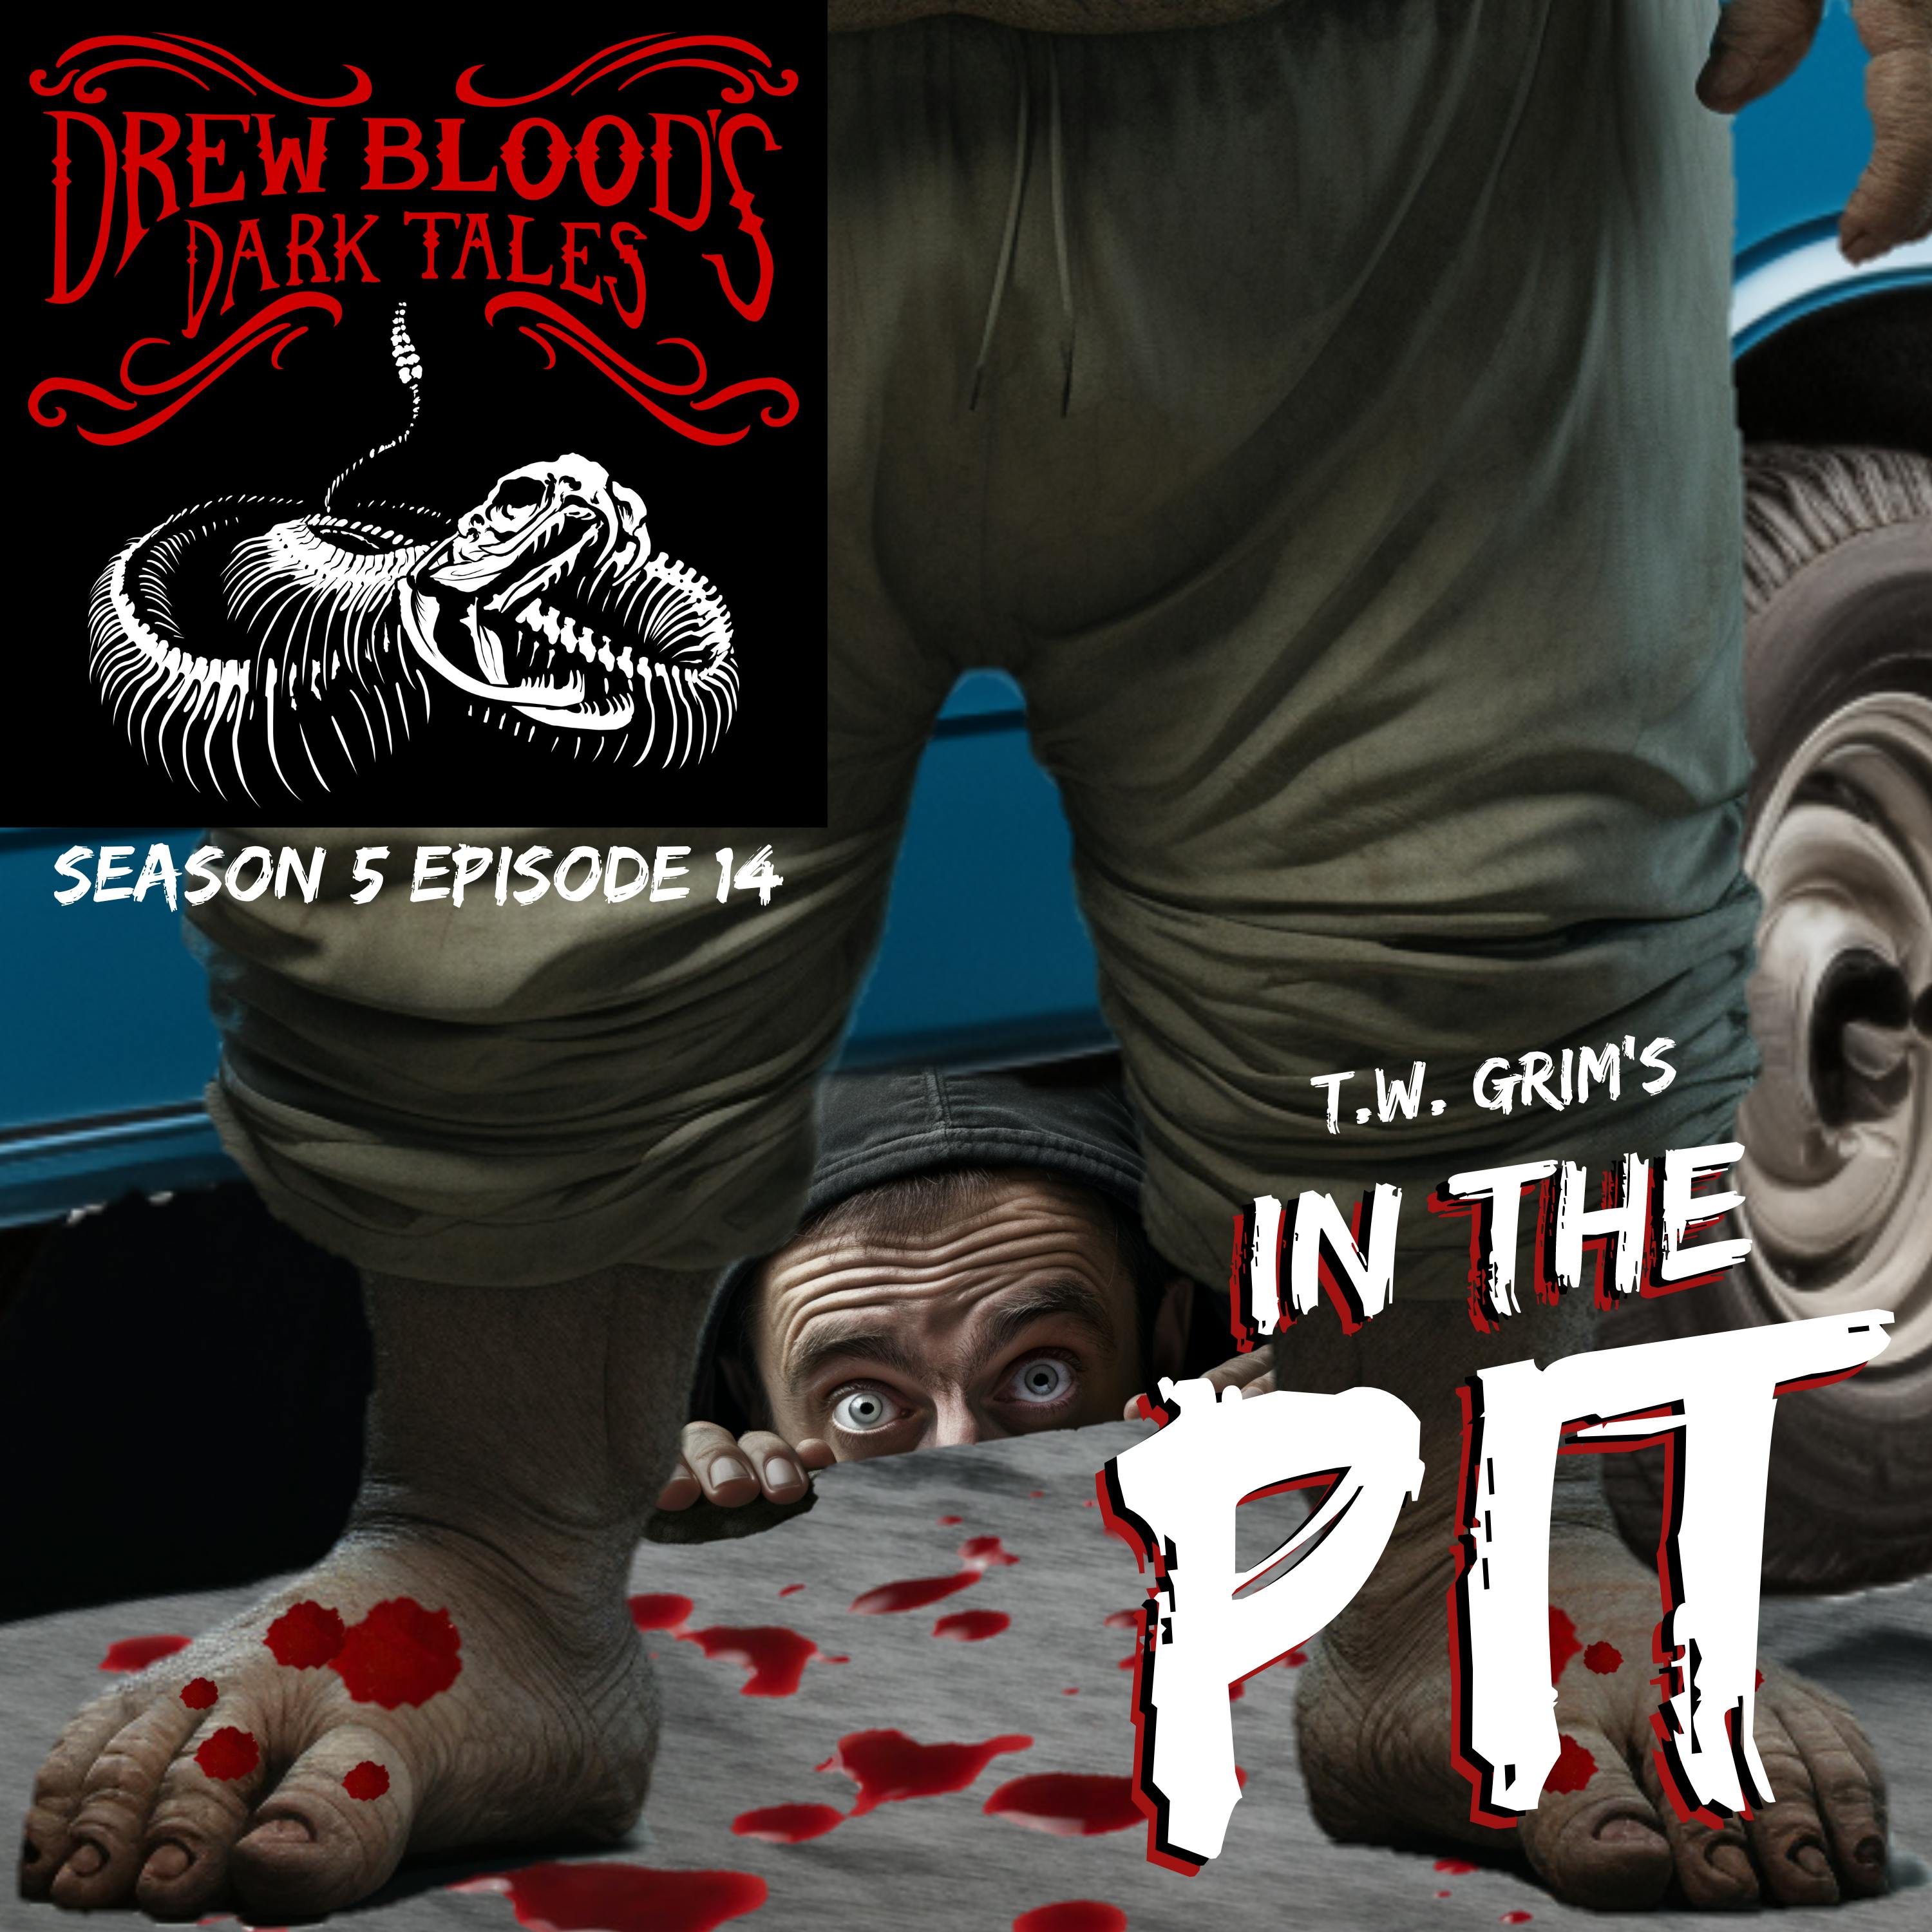 S5E14 - "In the Pit " - Drew Blood